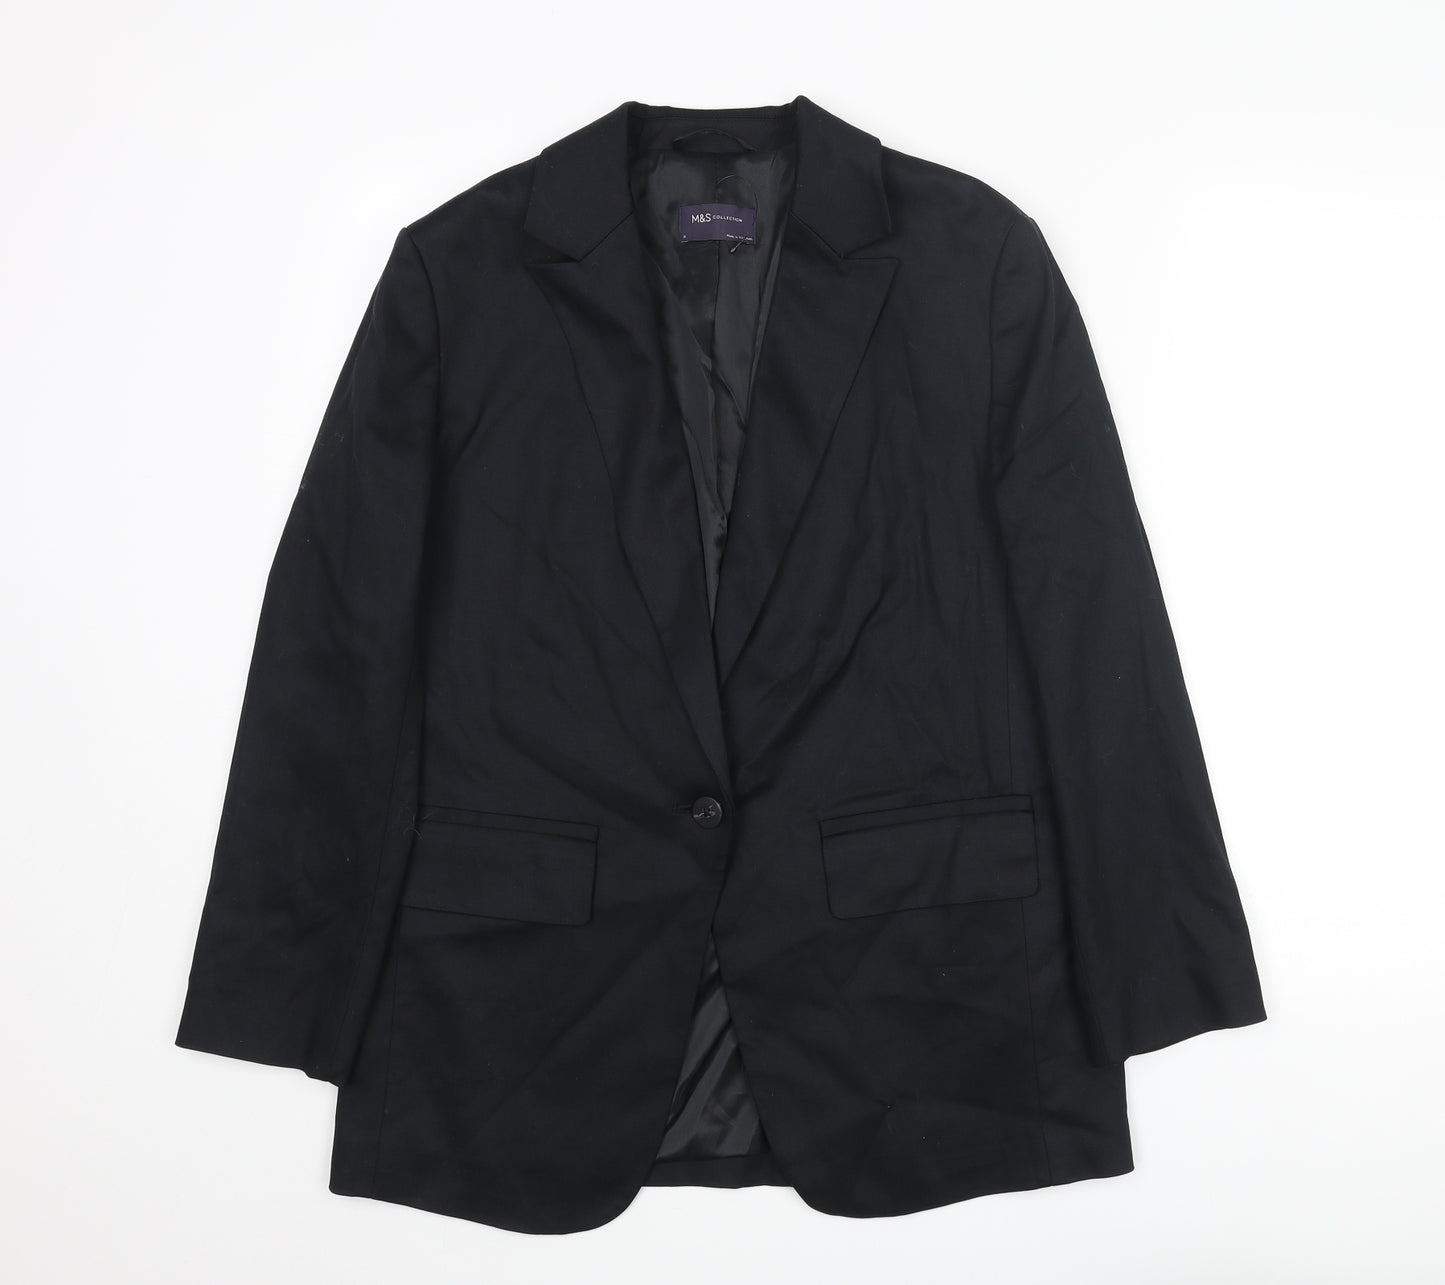 Marks and Spencer Womens Black Lyocell Jacket Suit Jacket Size 8